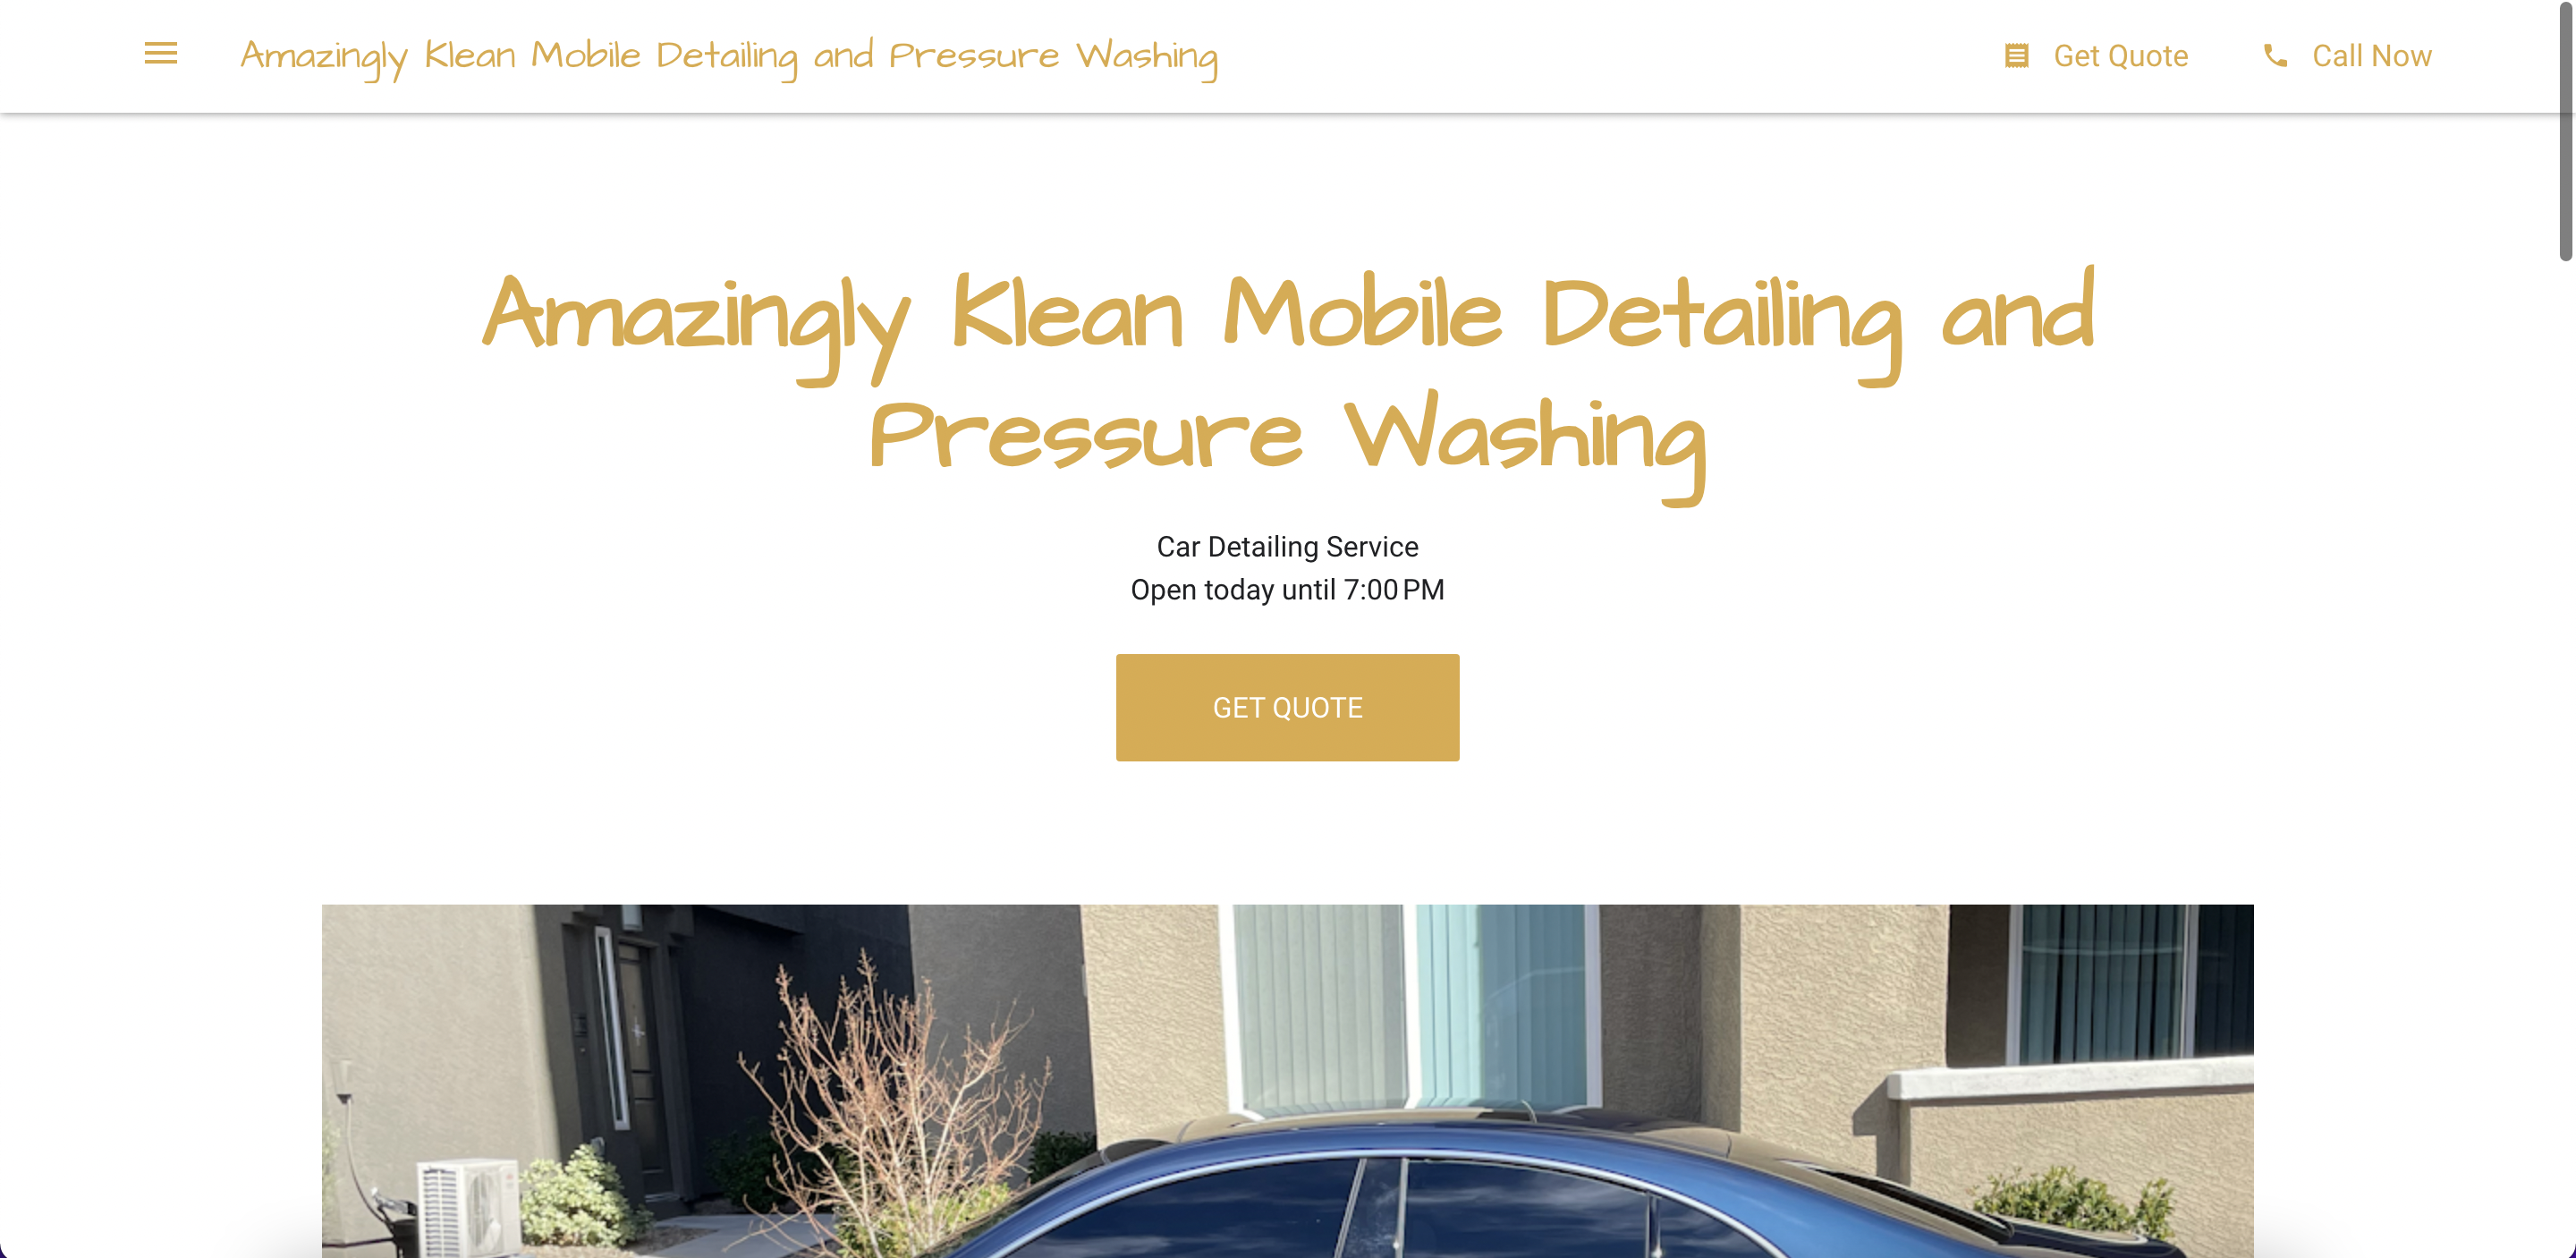 Amazingly Klean Mobile Detailing and Pressure Washing